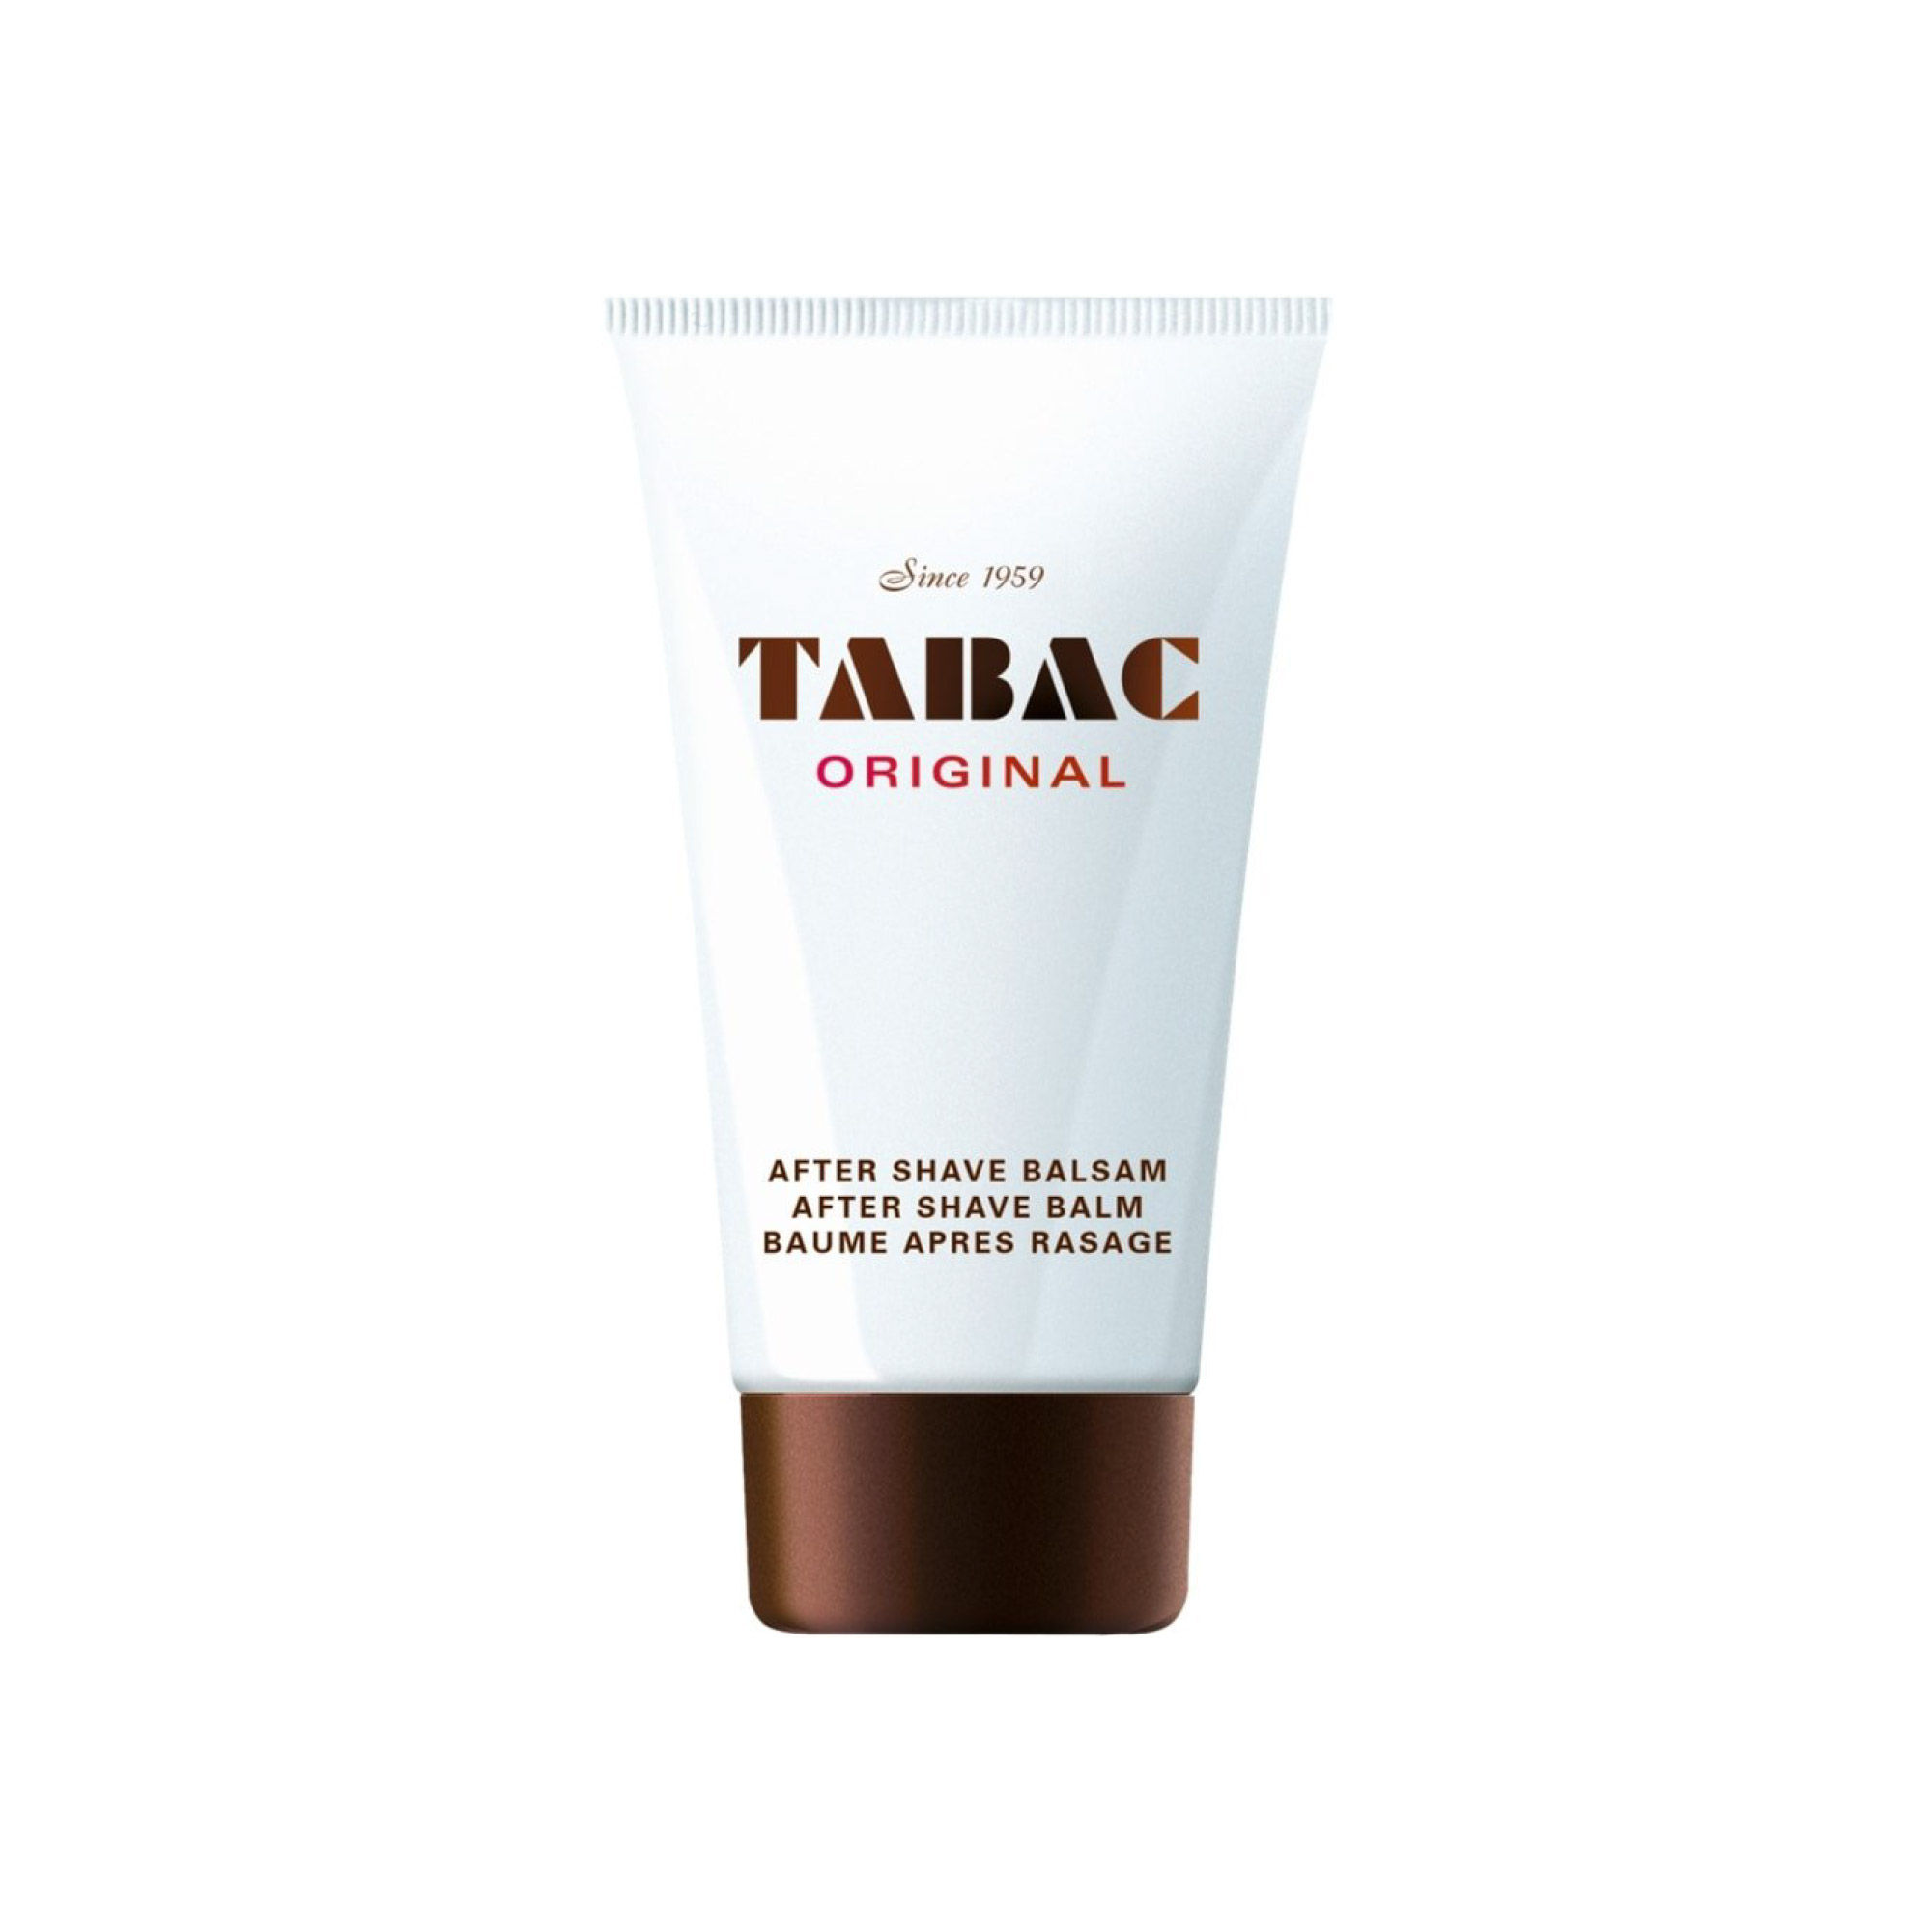 TABAC Original After Shave Balm 75ml